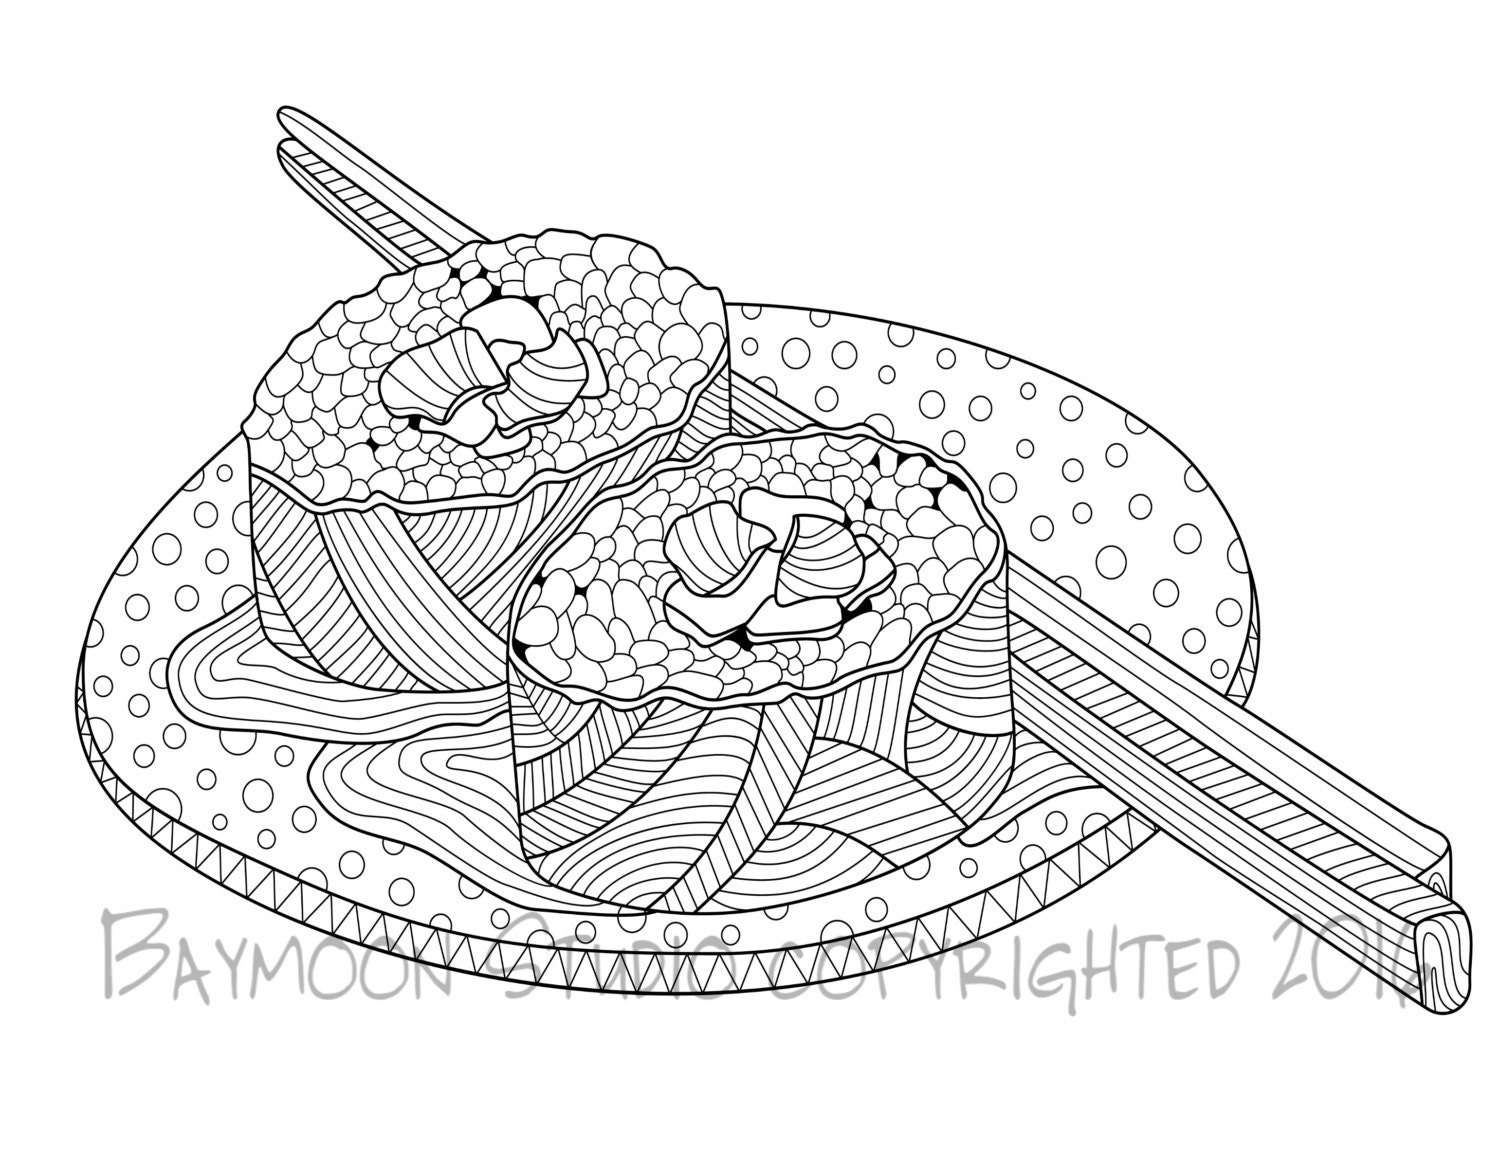 Sushi Coloring Page Printable Coloring Pages by BAYMOONSTUDIO